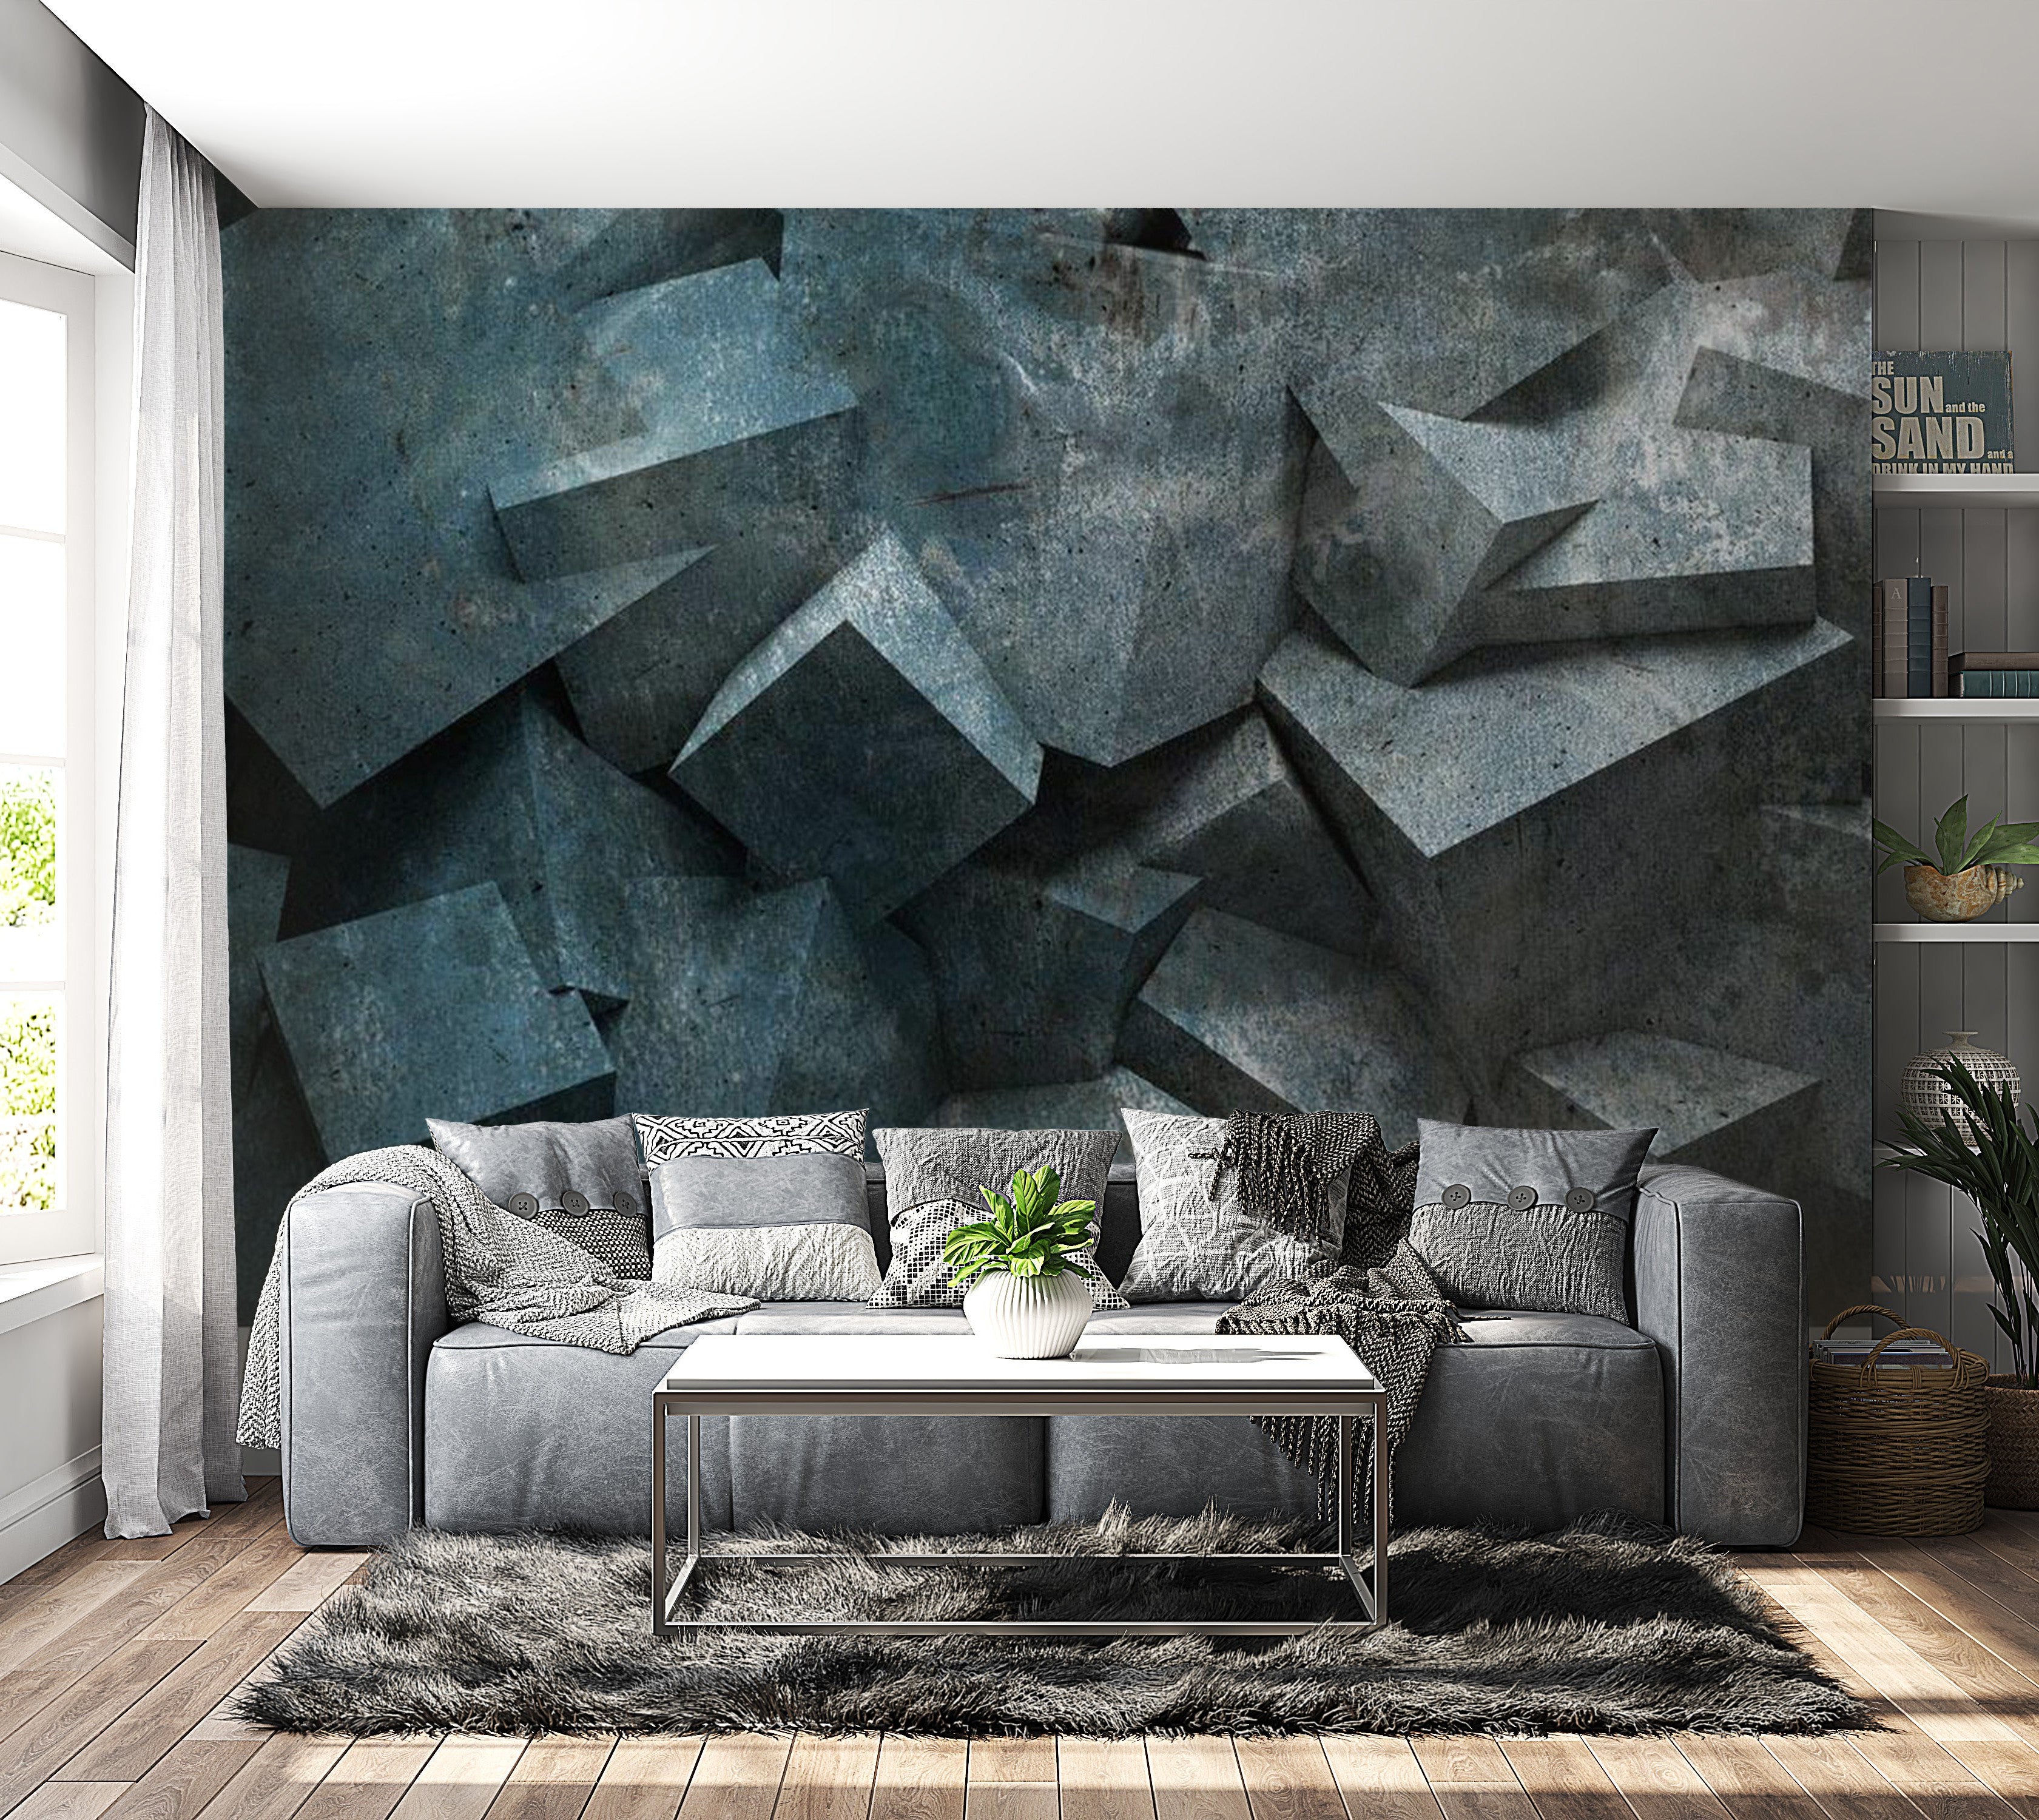 Peel & Stick Wall Mural - Concrete Blocks Blue Grey - Removable Wall Decals